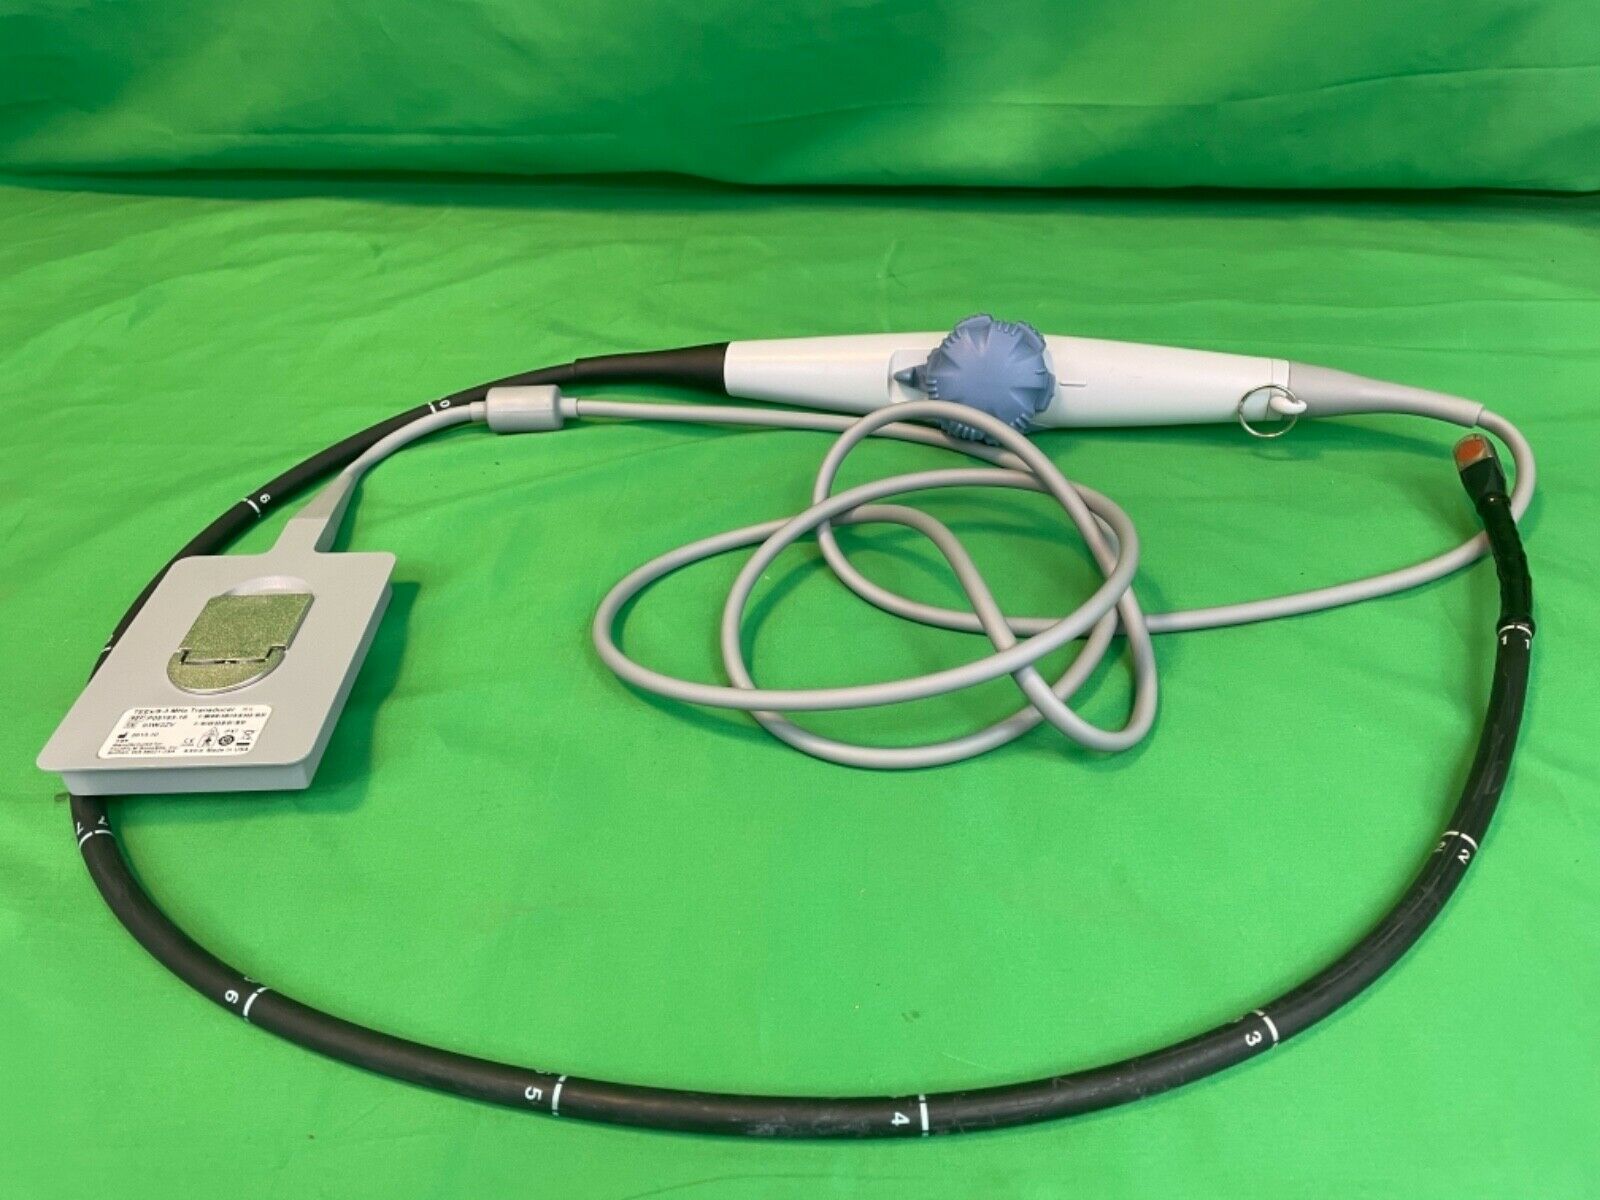 Sonosite TEE 8-3 MHz. Ultrasound Probe Transducer for MicroMaxx or M-Turbo DIAGNOSTIC ULTRASOUND MACHINES FOR SALE